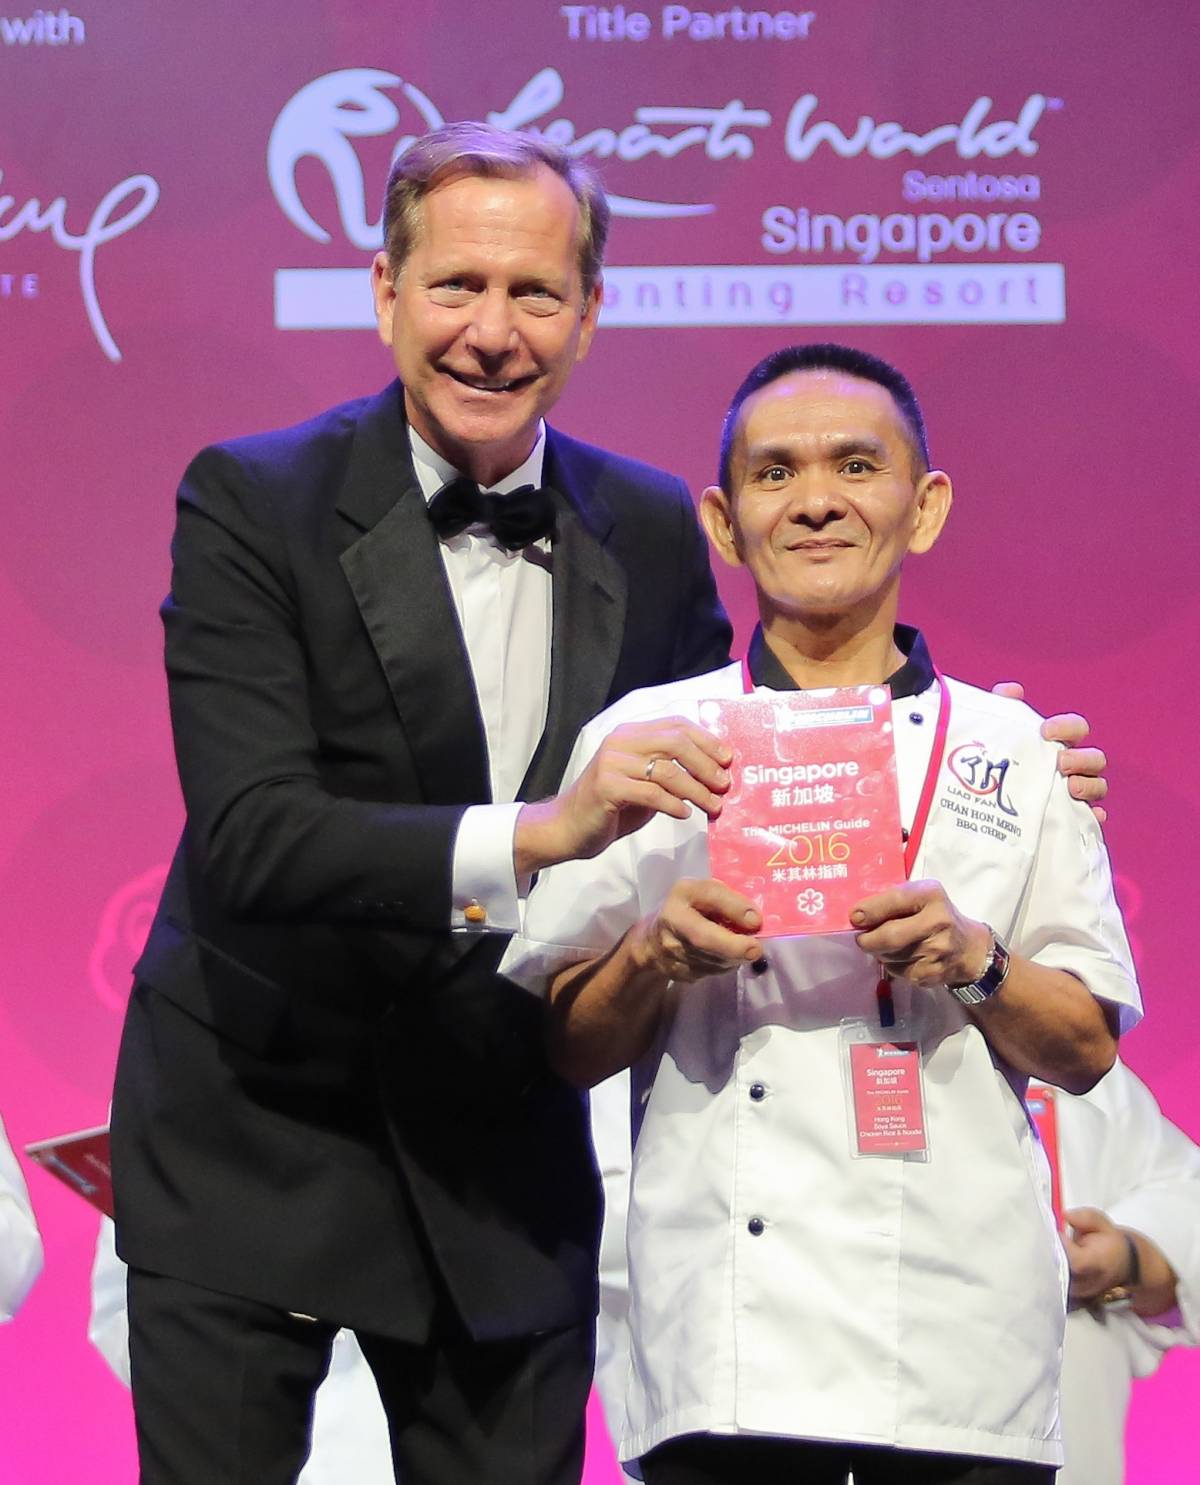 Michelin reveals the richness of Singapore's gastronomy